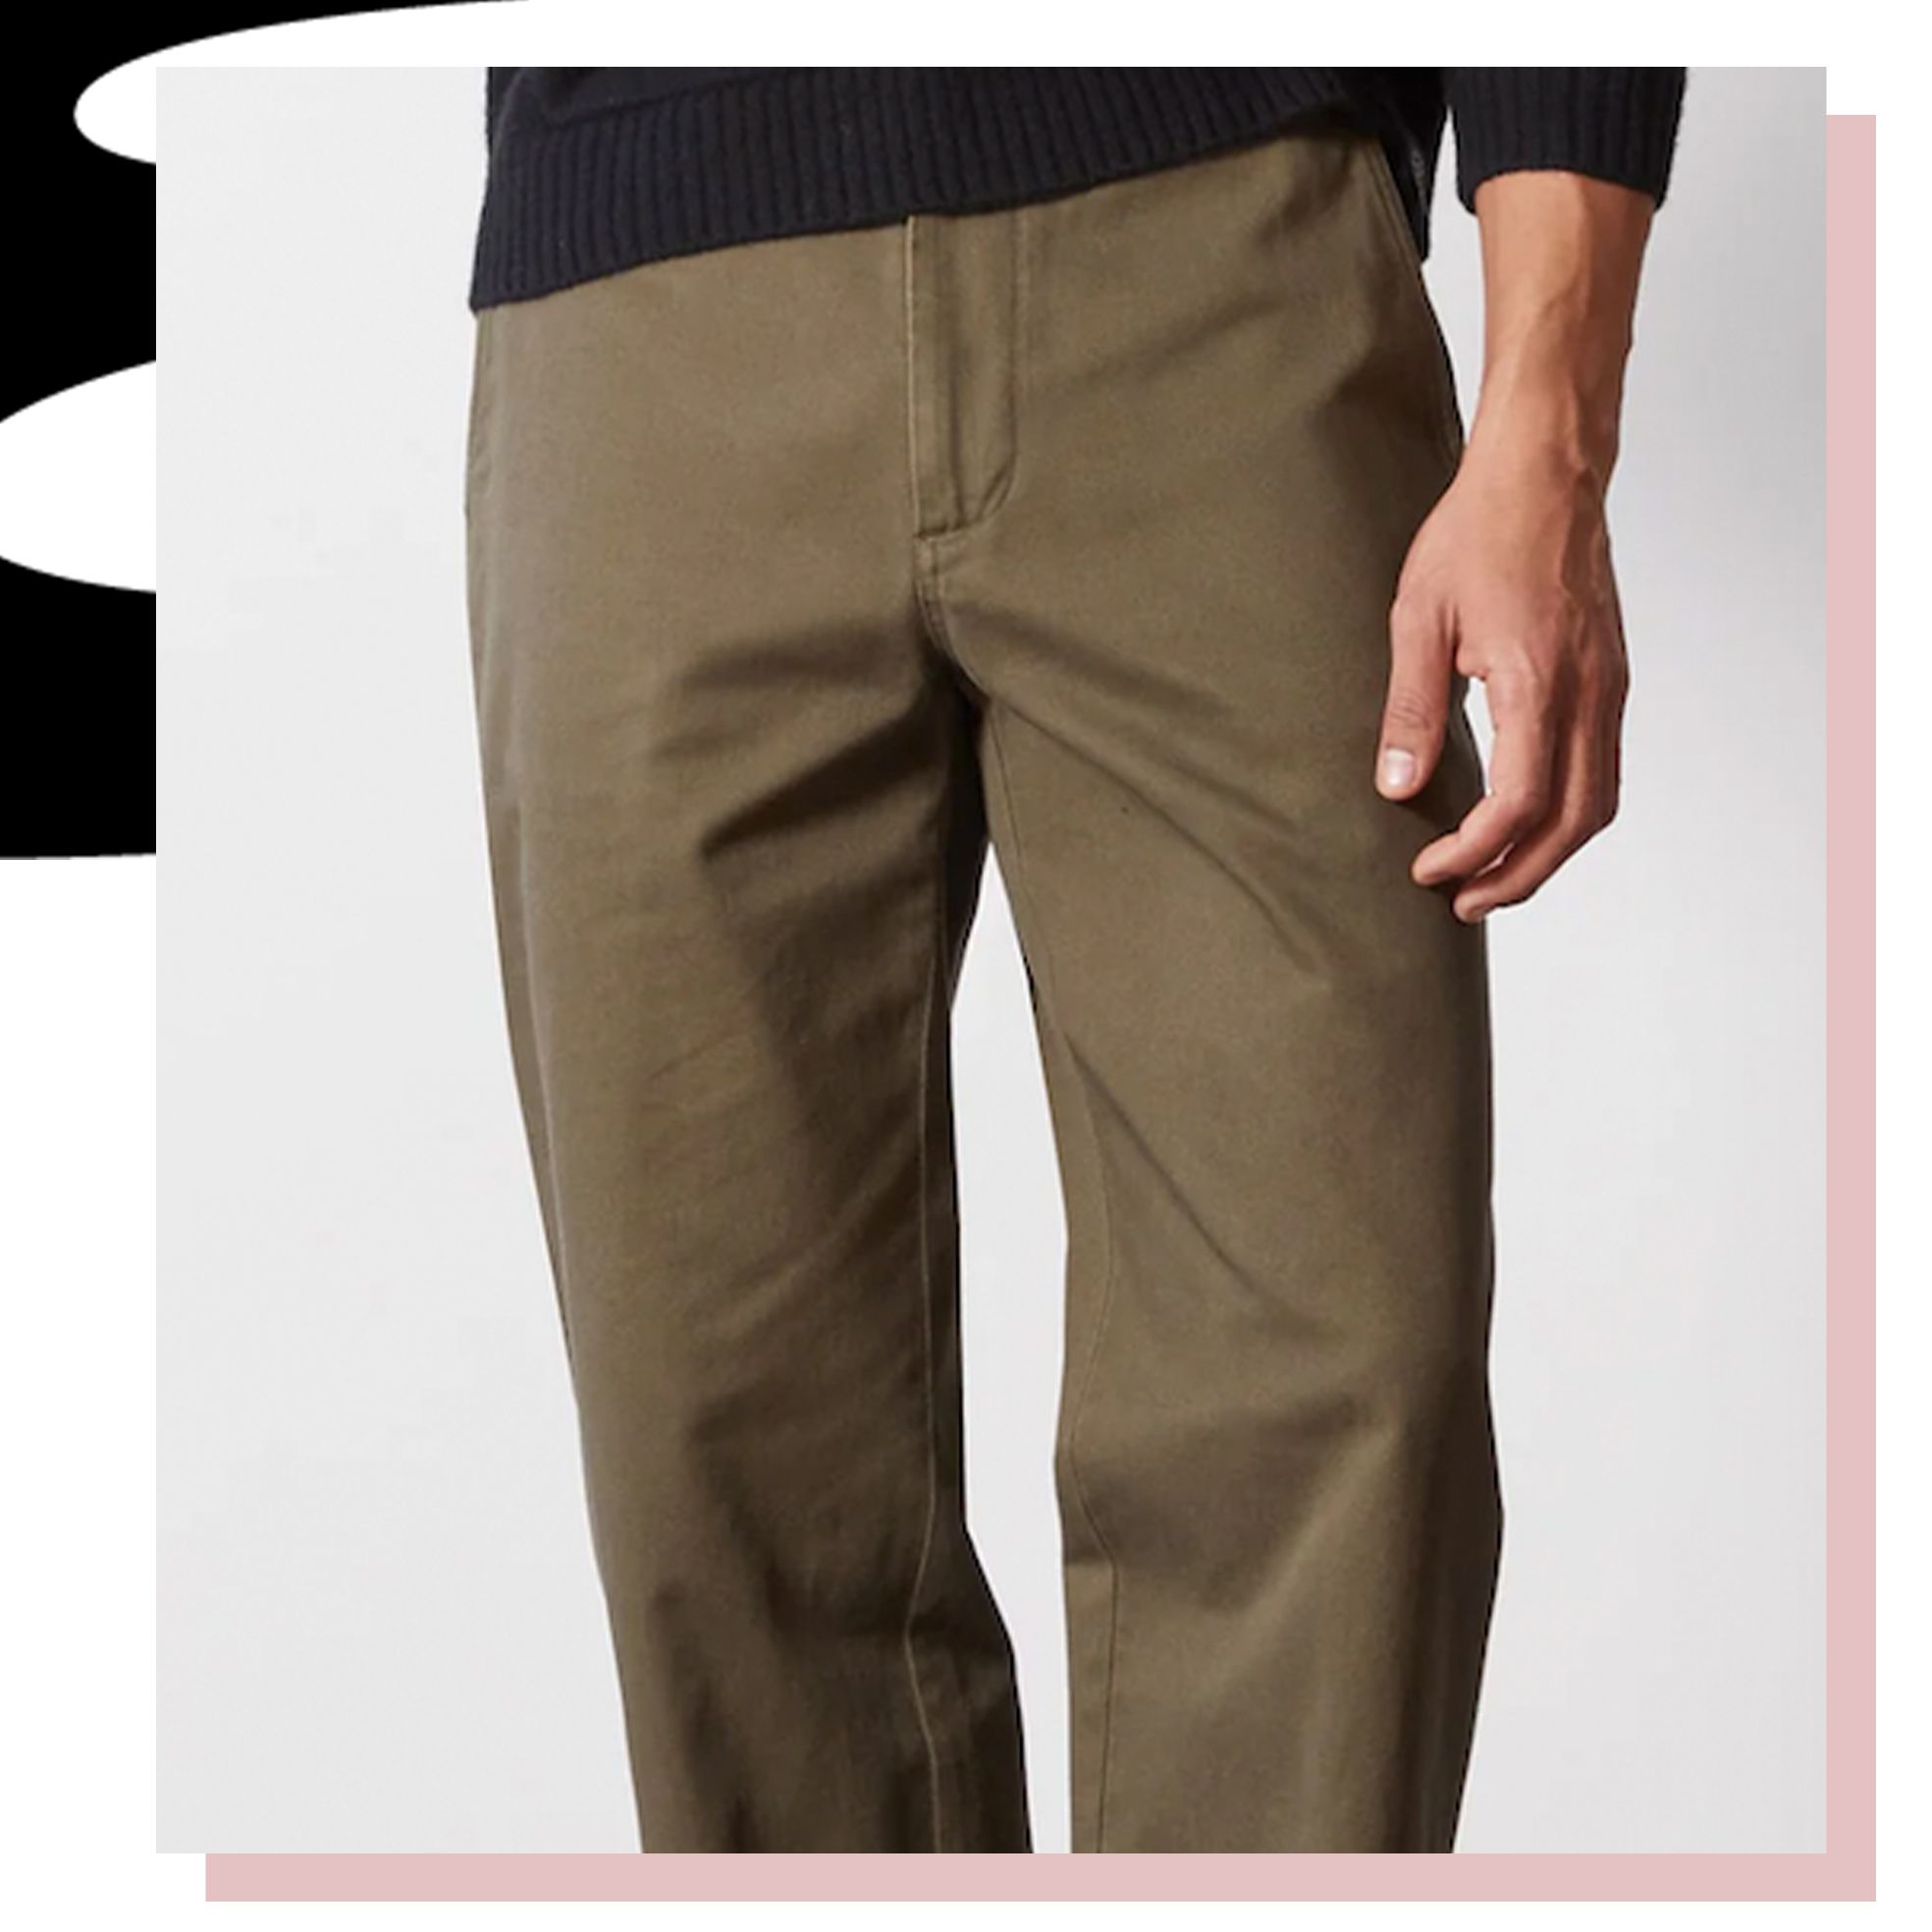 11 Best Chinos That Look Great in Summer (and Every Other Season, Too)